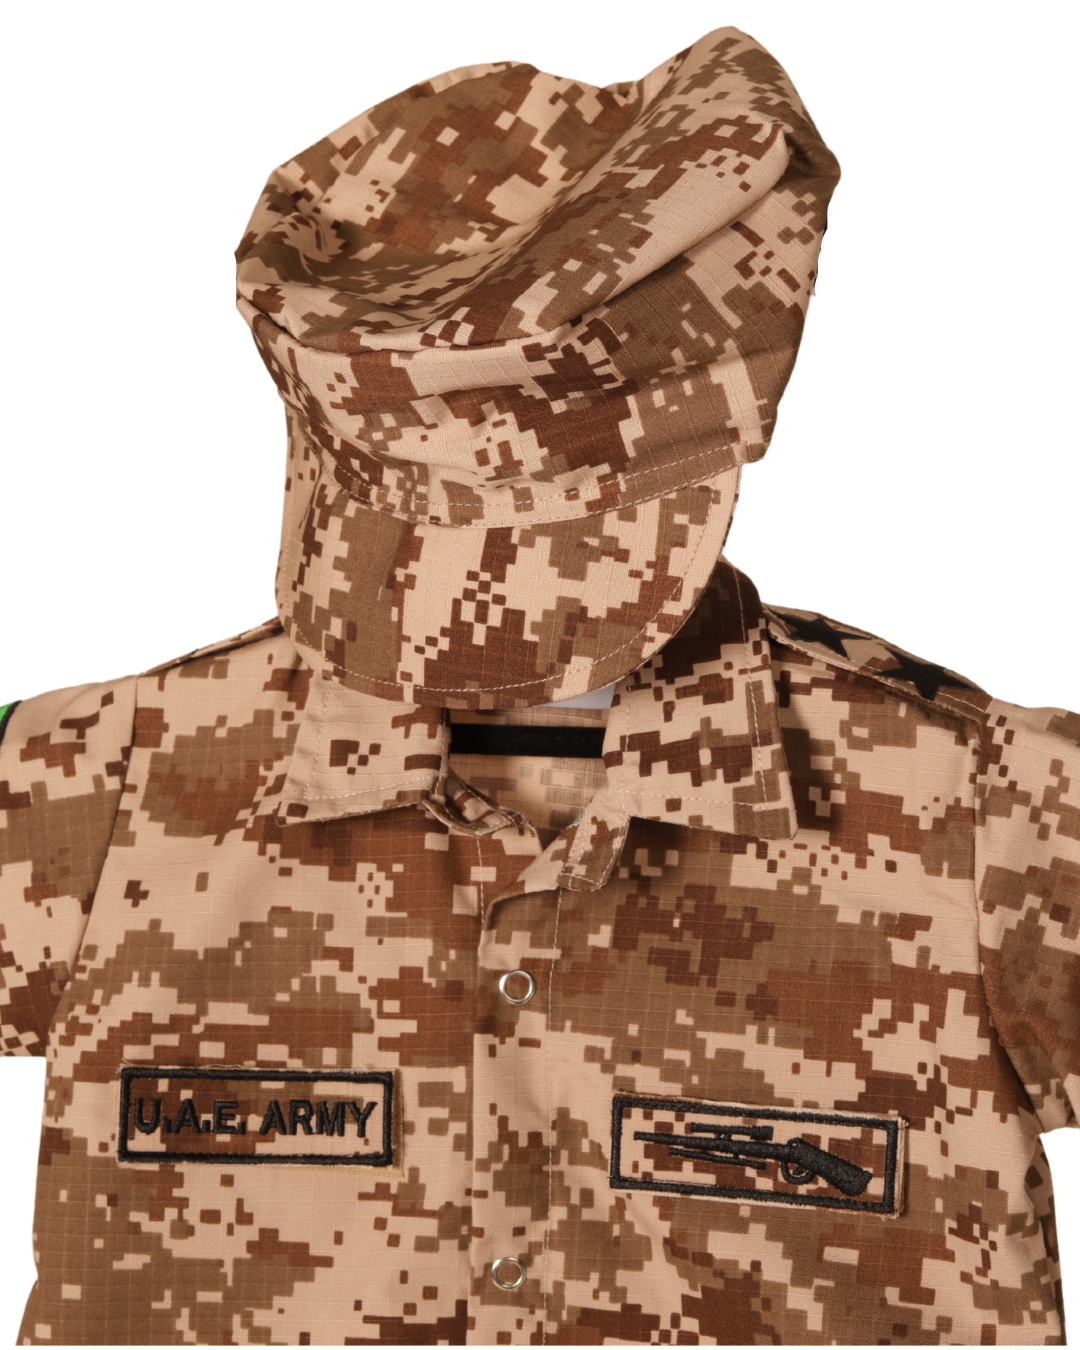 UAE Army Infant uniform - OVERALL